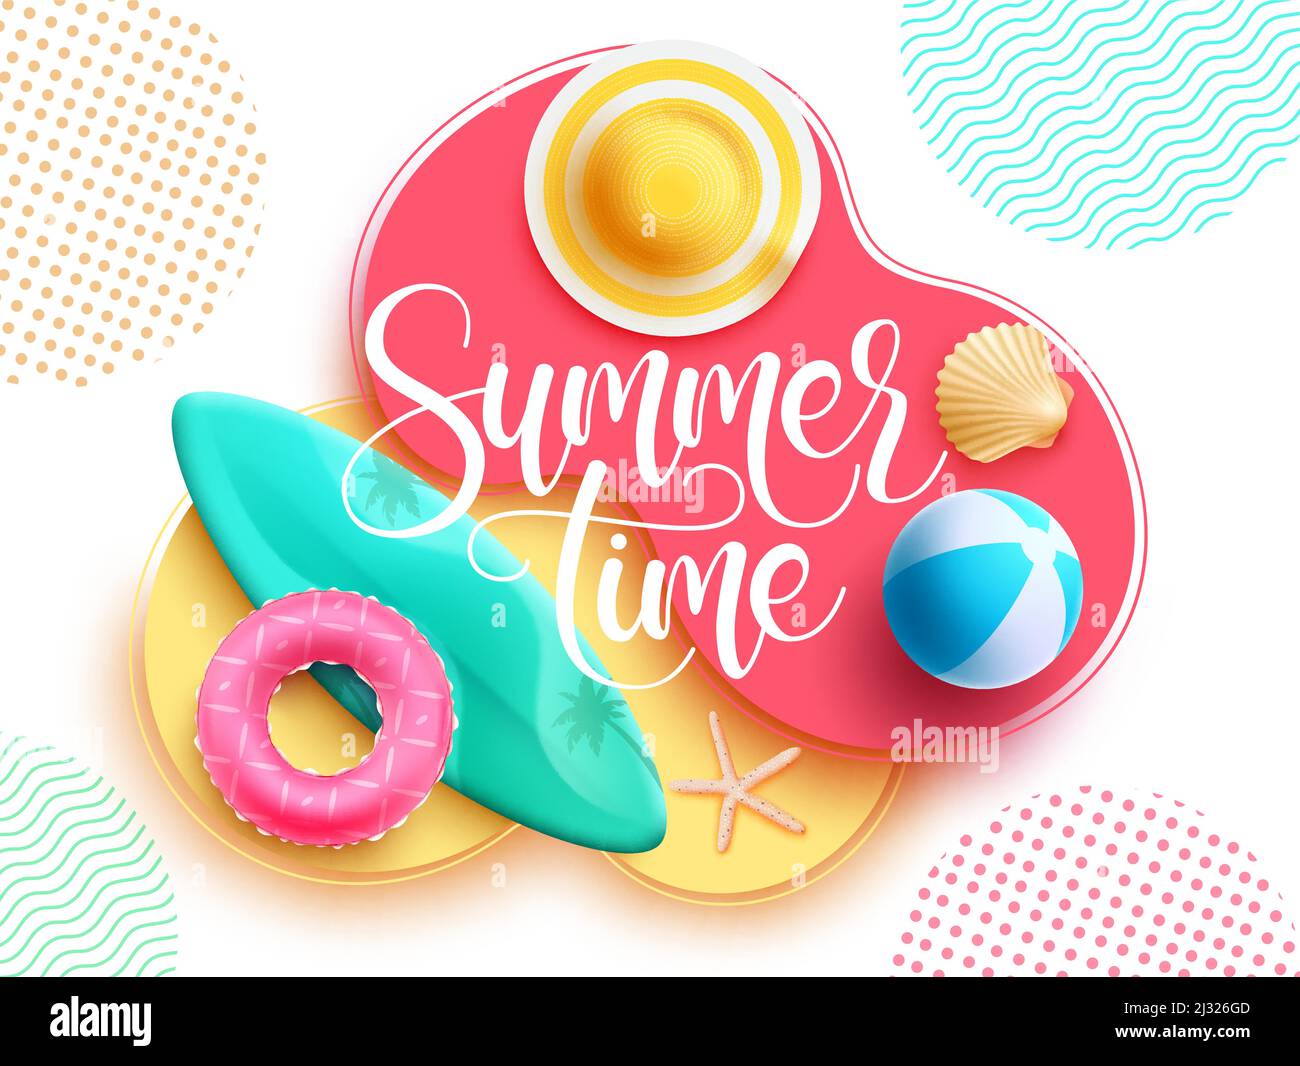 Summertime vector design. Summer time typography text in abstract shape and colorful pattern background with tropical elements for holiday season. Stock Vector